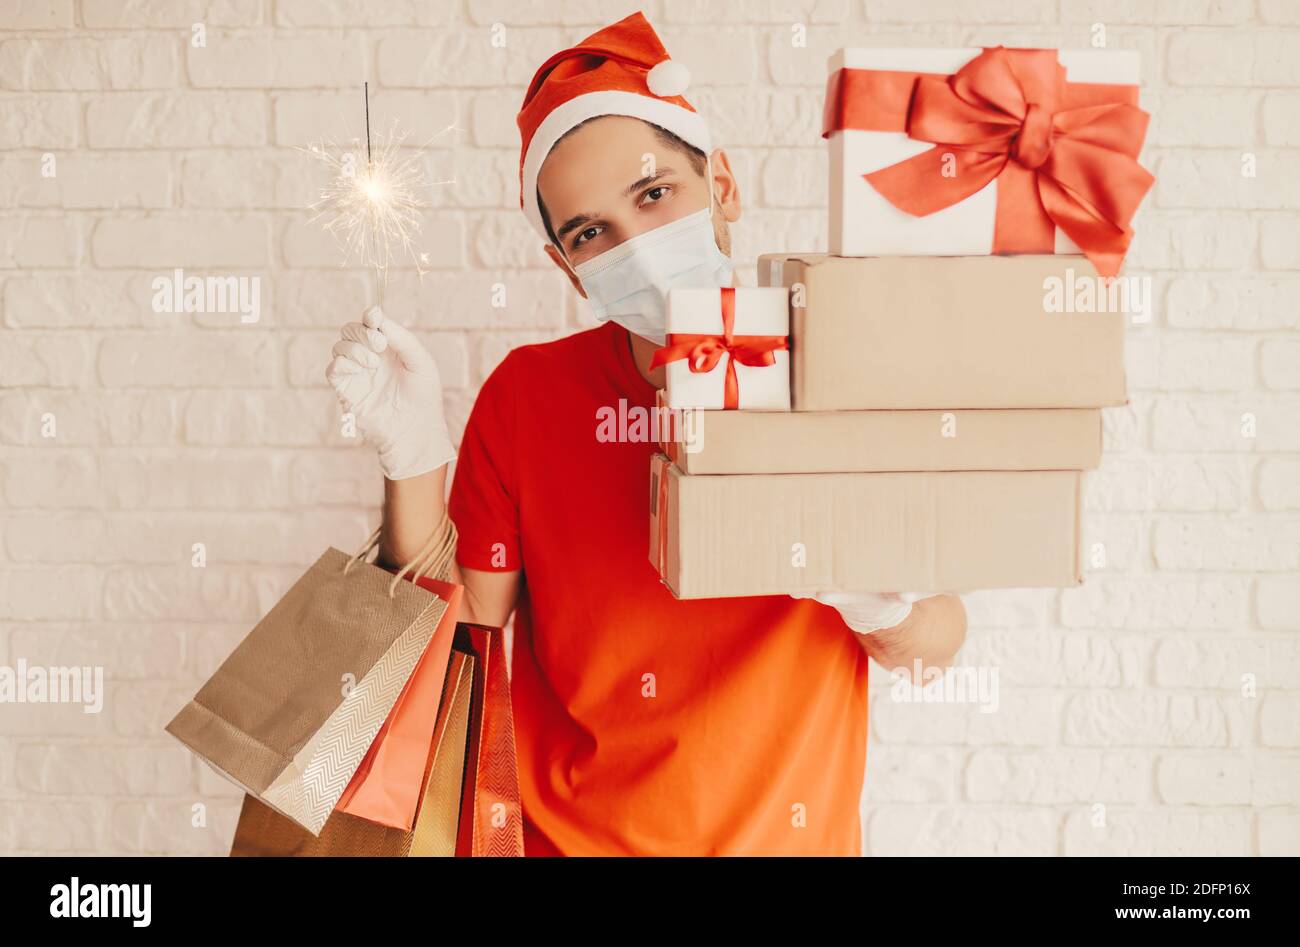 https://c8.alamy.com/comp/2DFP16X/young-festive-delivery-man-in-medical-face-mask-protective-gloves-santa-hat-hold-light-sparkler-shopping-bags-cardboard-gift-boxes-and-smile-happ-2DFP16X.jpg